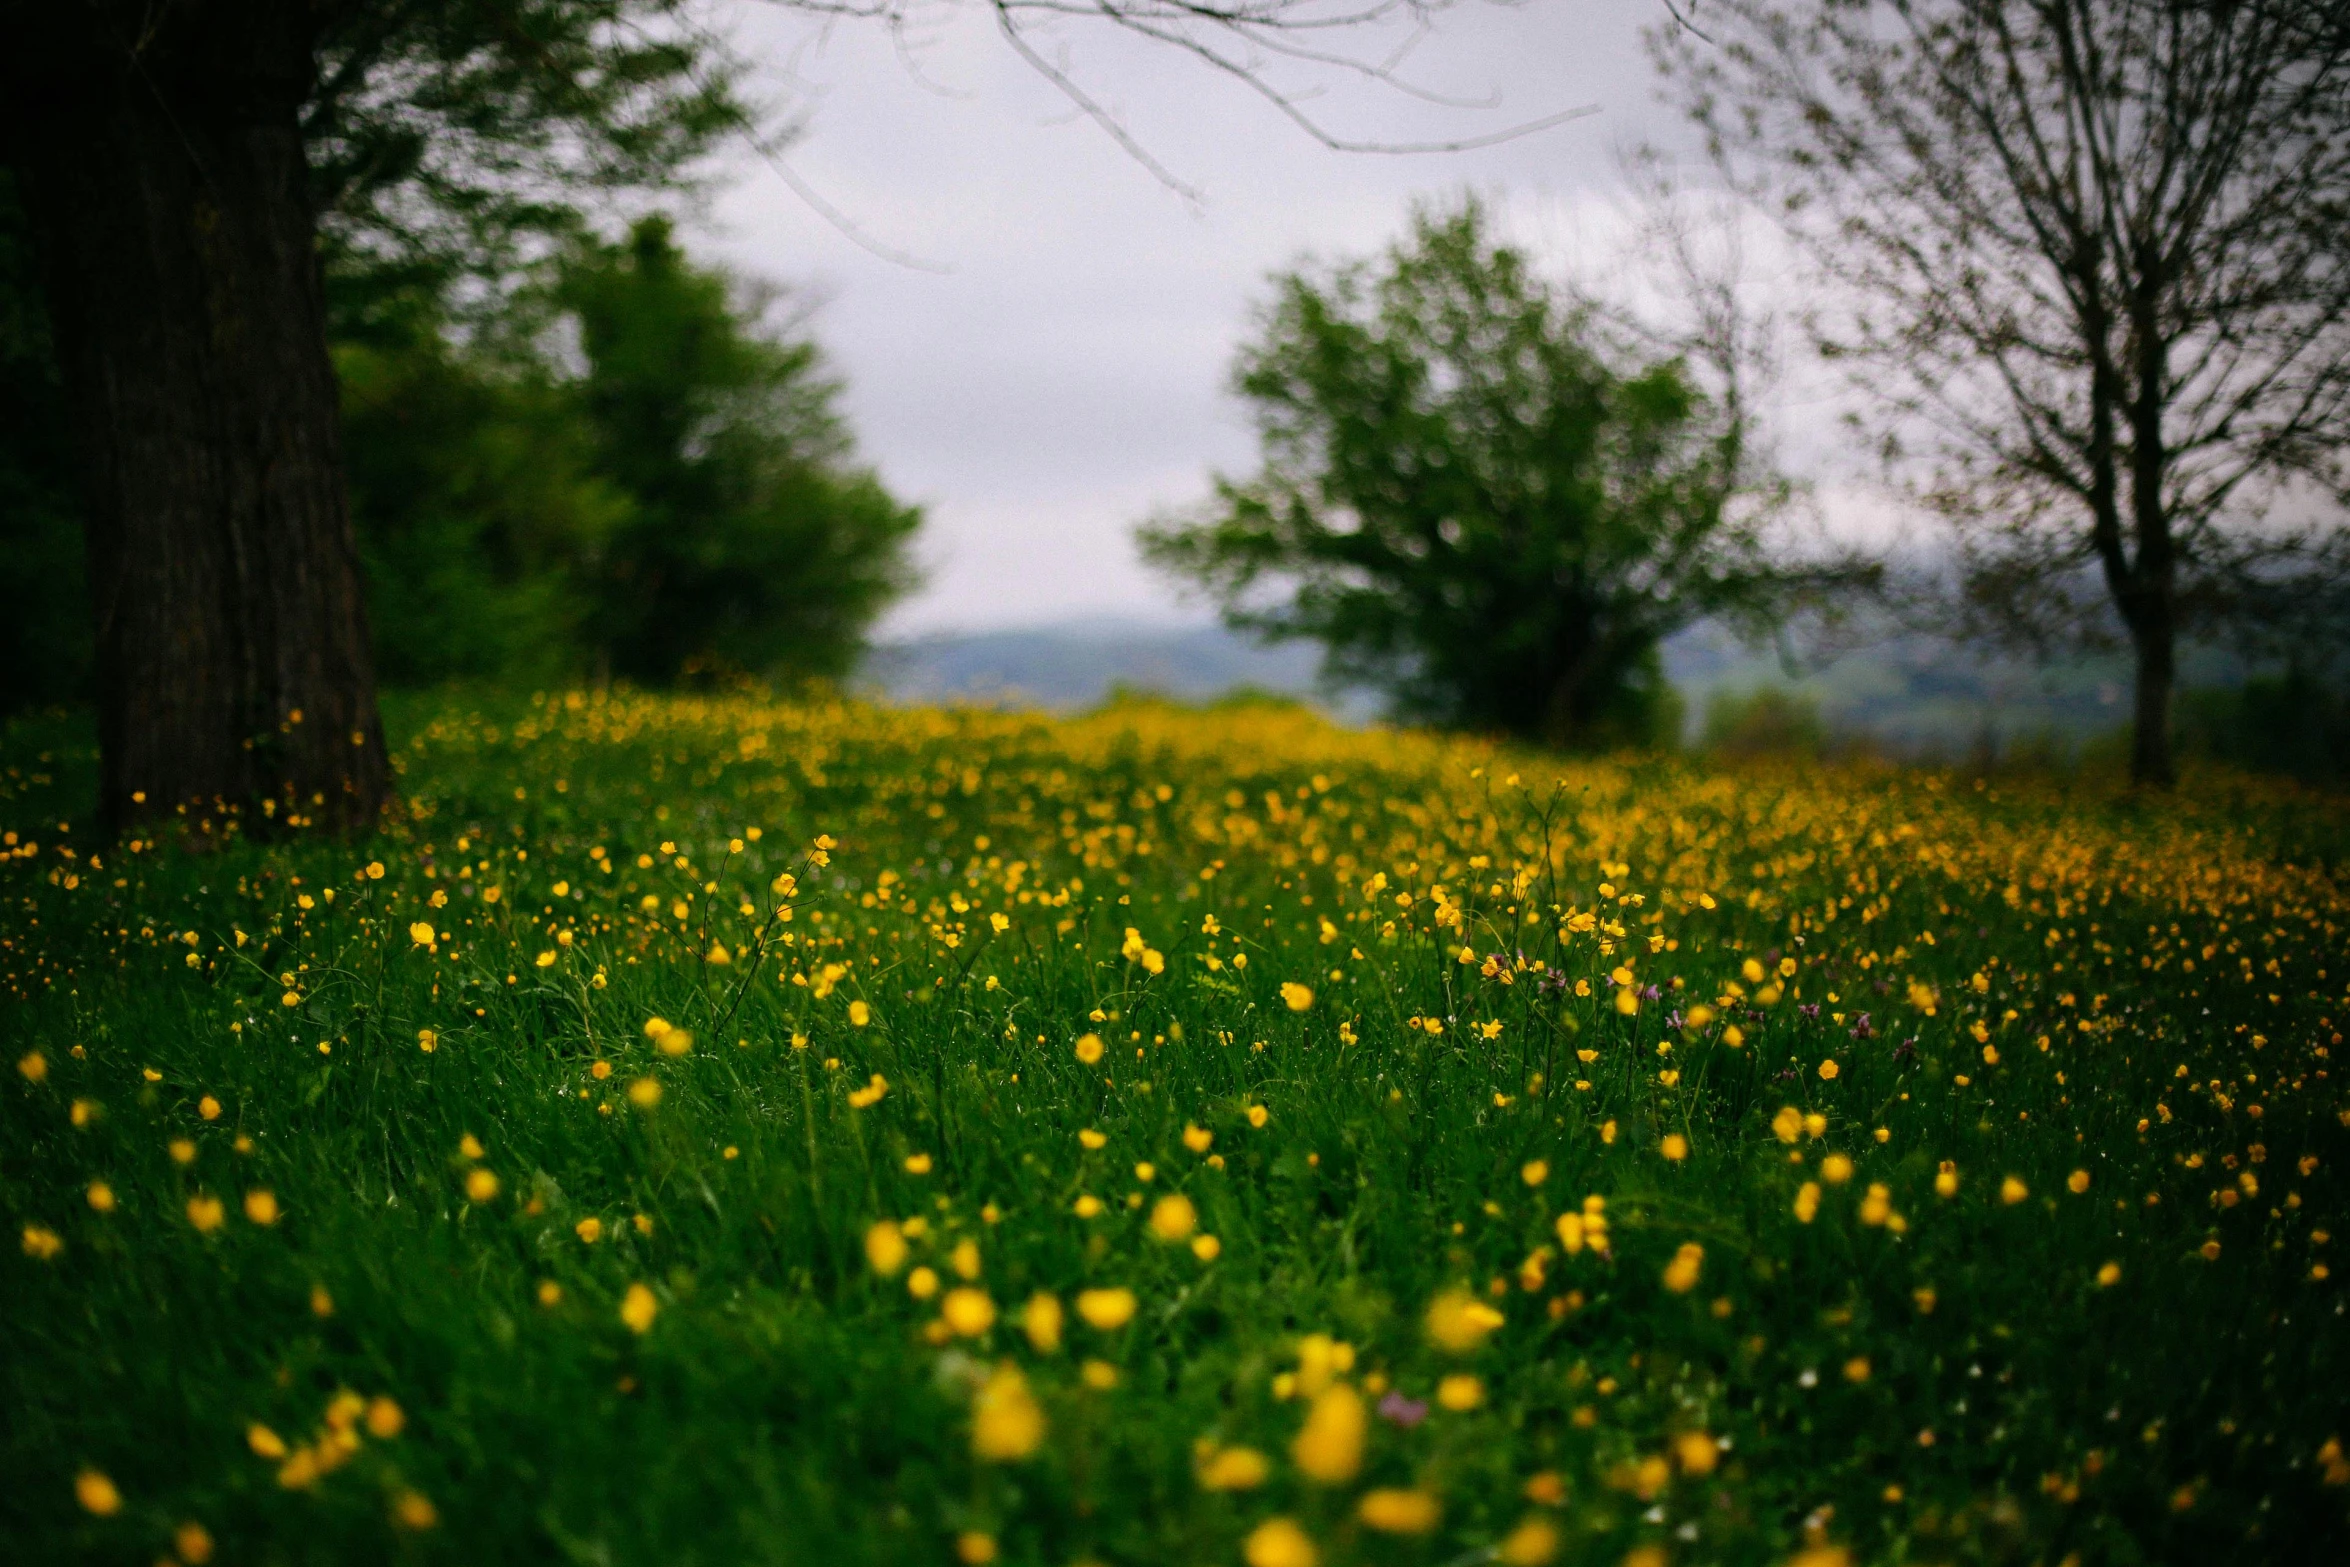 the yellow flowers are on the ground by the trees